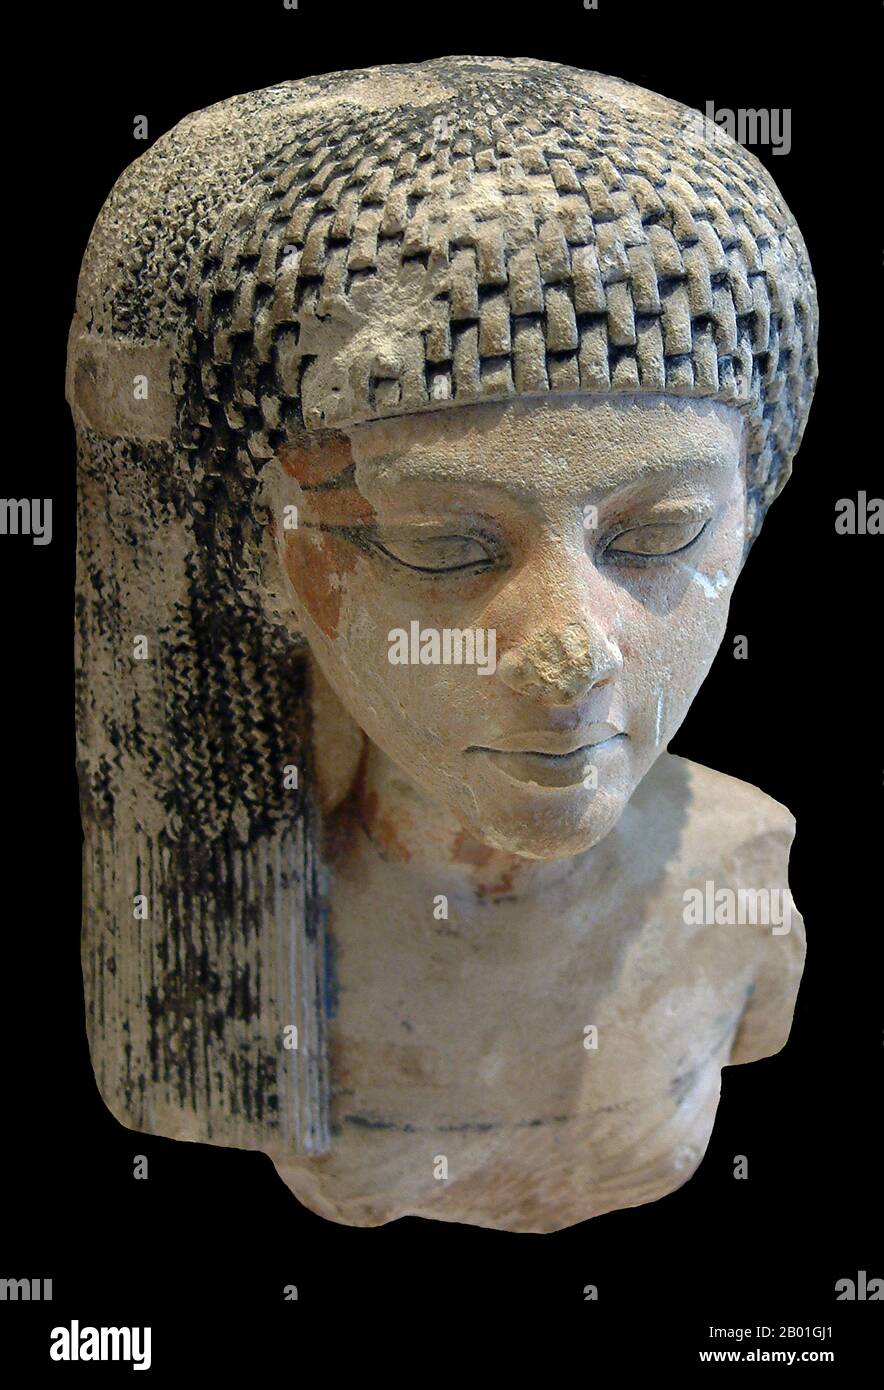 Egypt: Meritaten, ancient Egyptian Queen of the Eighteenth Dynasty.  Limestone bust, c. 1351-1332 BCE. Photo by Aoineko (CC BY-SA 3.0 License).  Meritaten, also spelt Merytaten or Meryetaten, was an ancient Egyptian queen who held the position of Great Royal Wife to Pharaoh Smenkhkare, who may have been a brother or son of Akhenaten. Her name means 'She who is beloved of Aten', Aten being the sun-god her father worshipped. Meritaten may have also served as pharaoh in her own right under the name Ankhkheperure Neferneferuaten. Stock Photo